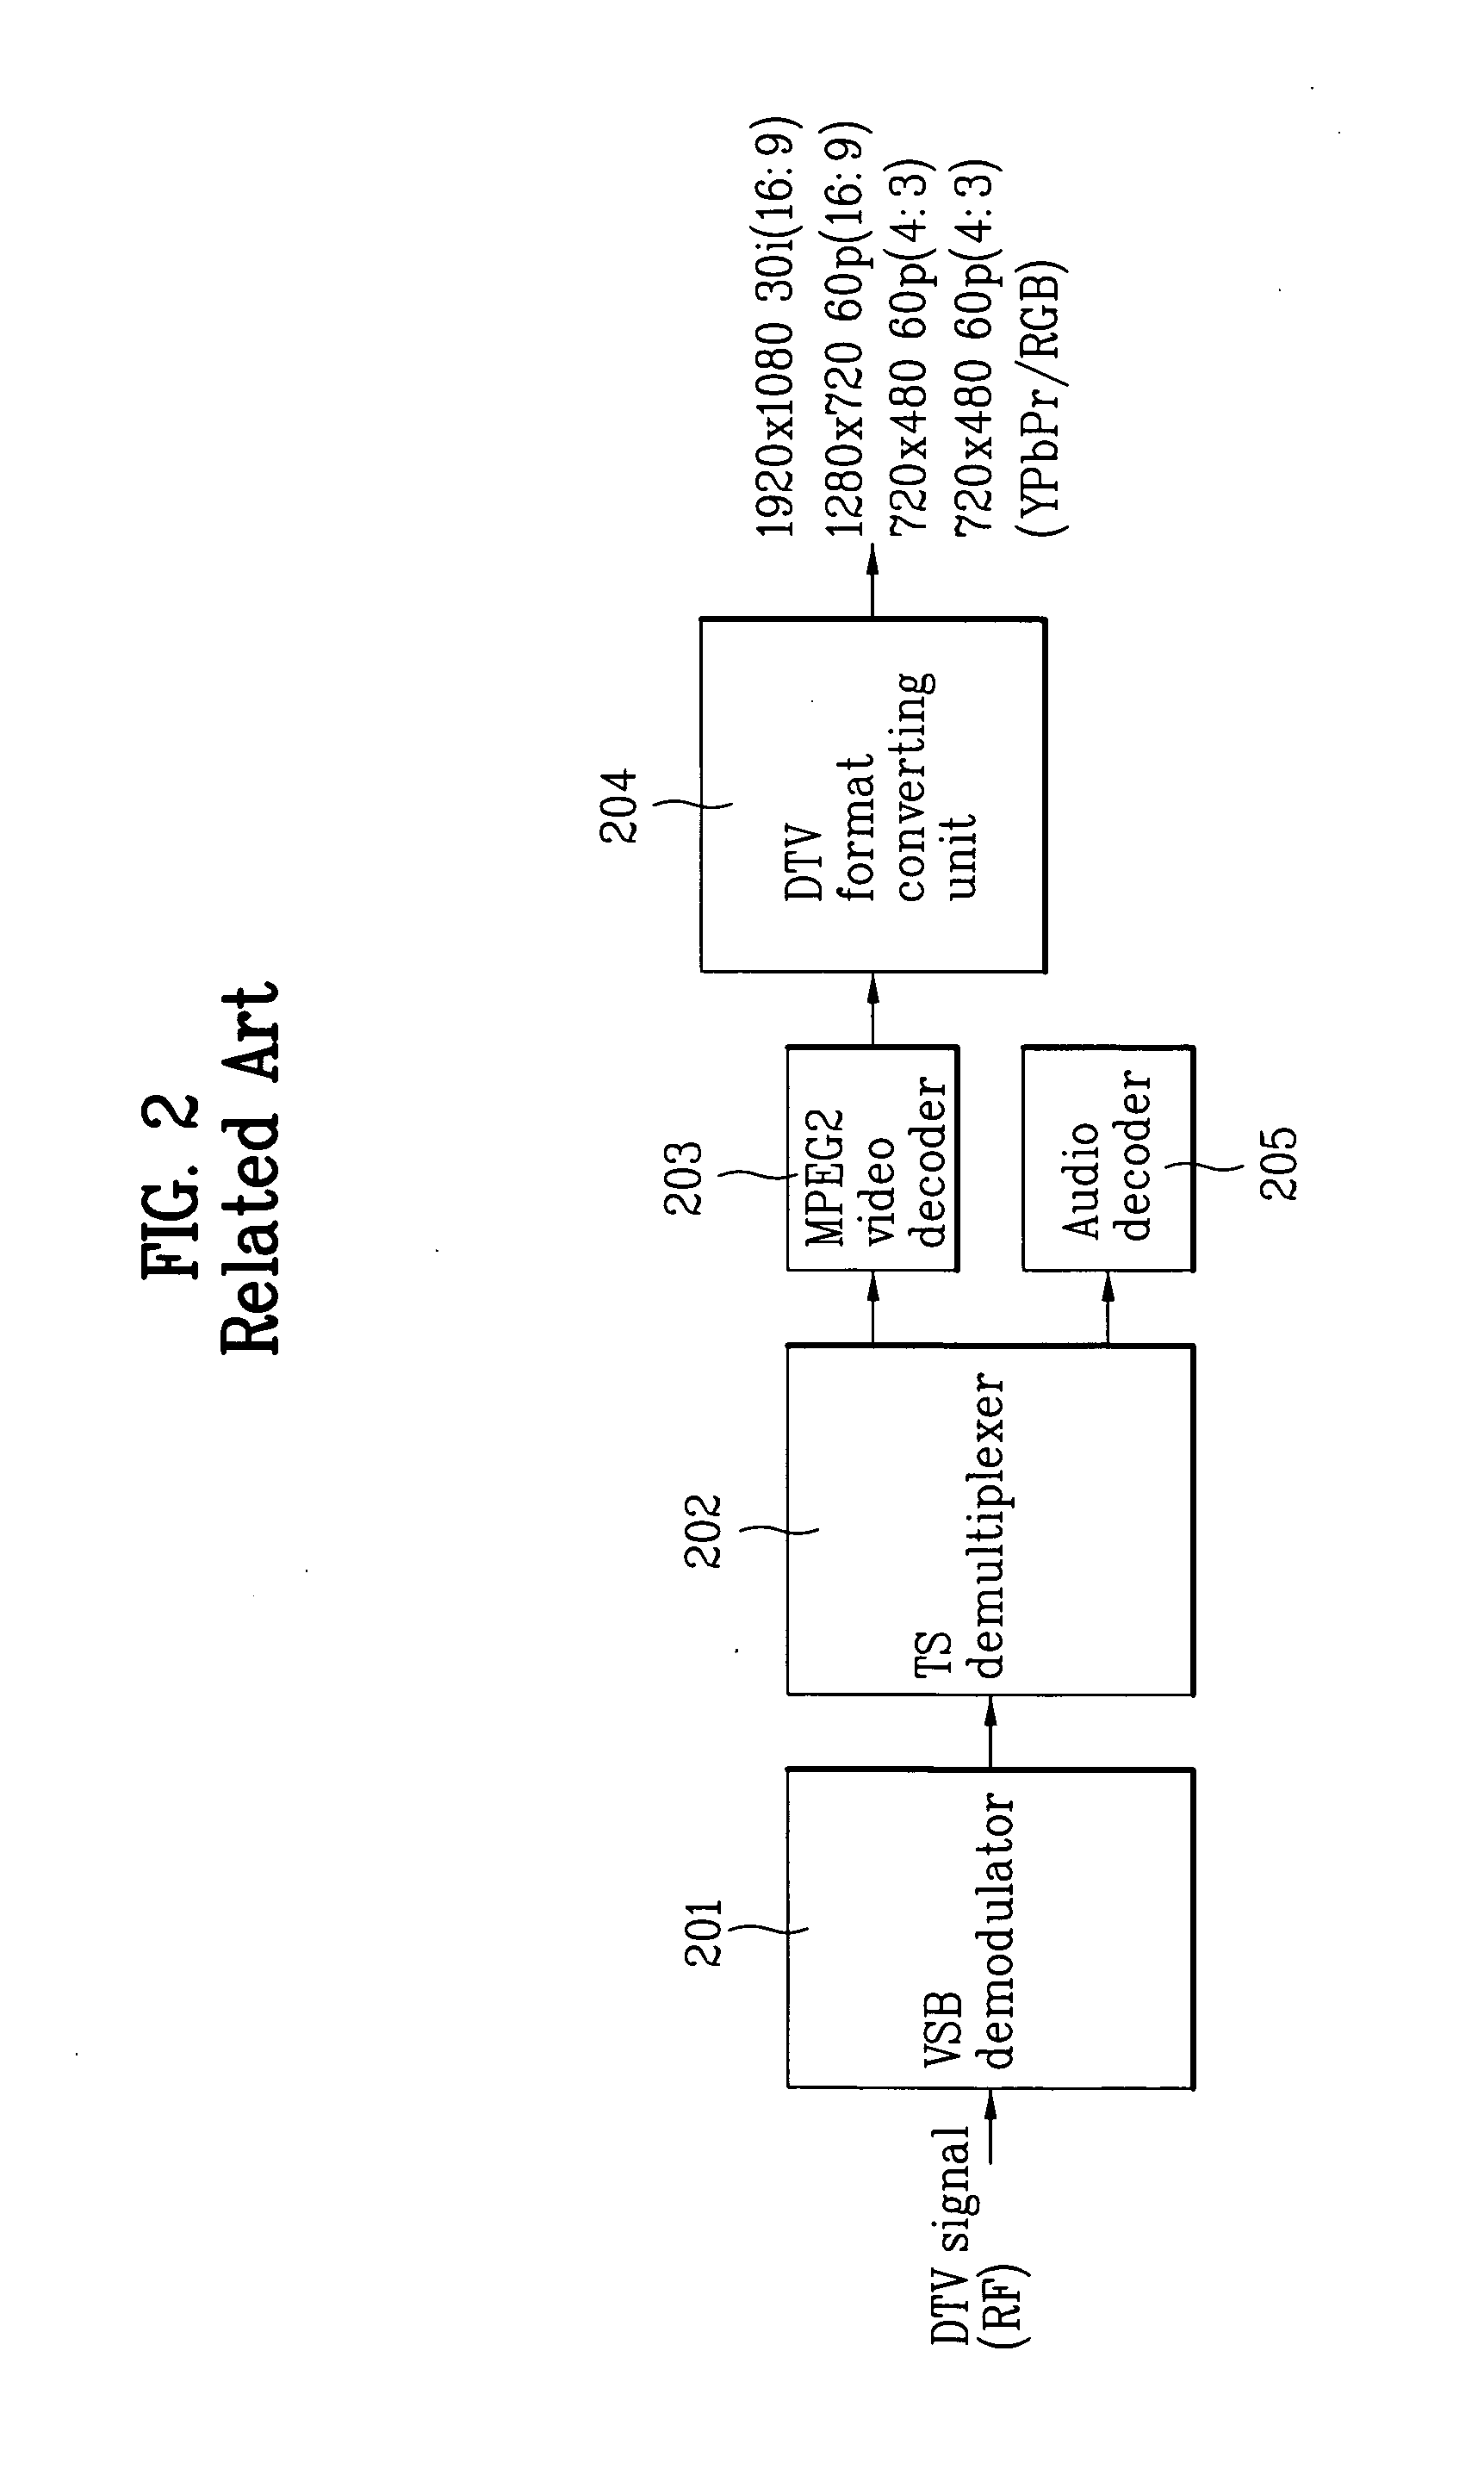 Apparatus for converting video format